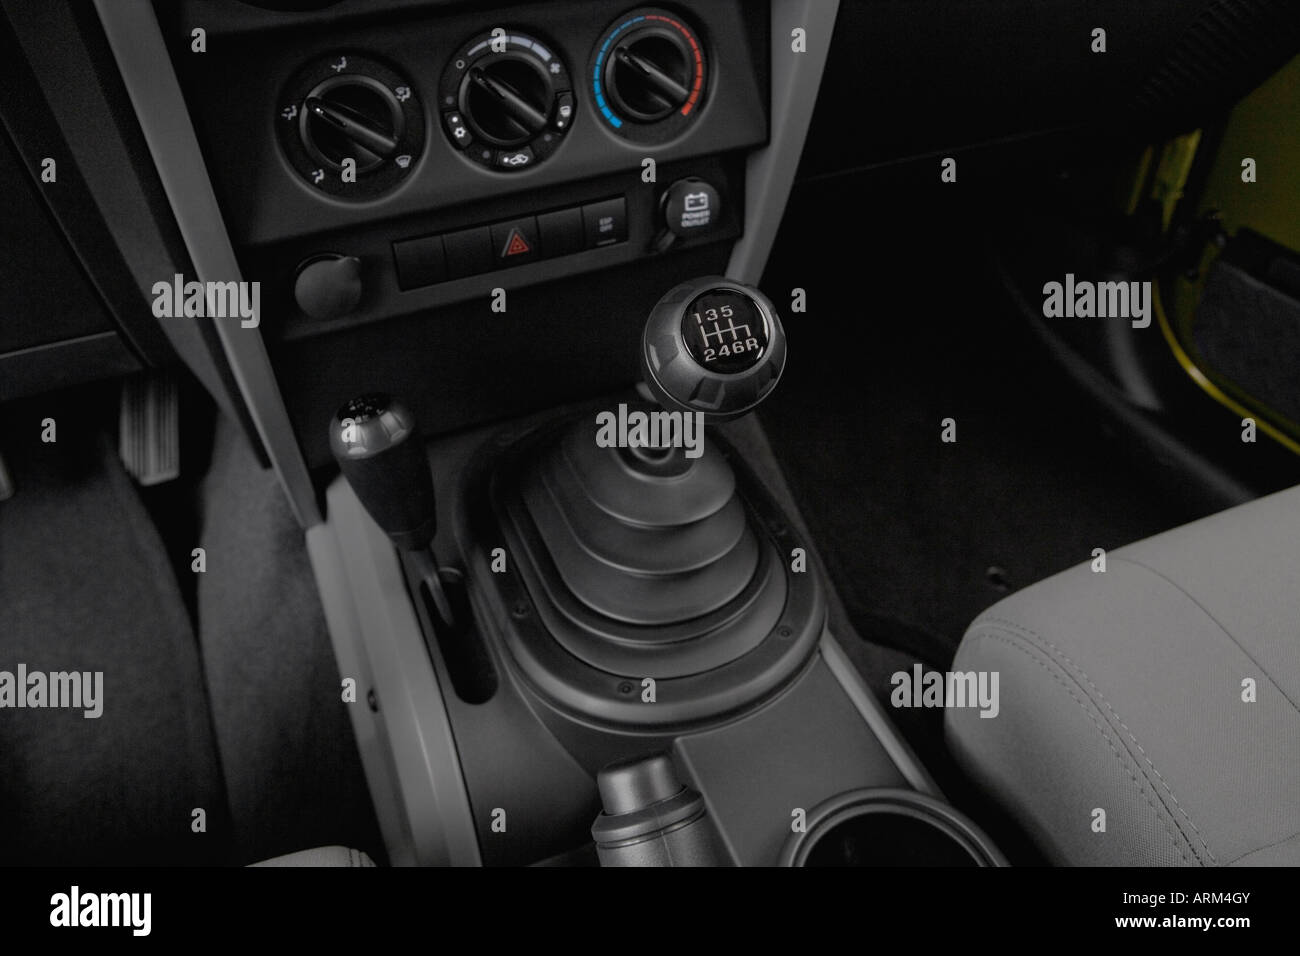 2008 Jeep Wrangler Unlimited X in Green - Gear shifter/center console Stock  Photo - Alamy